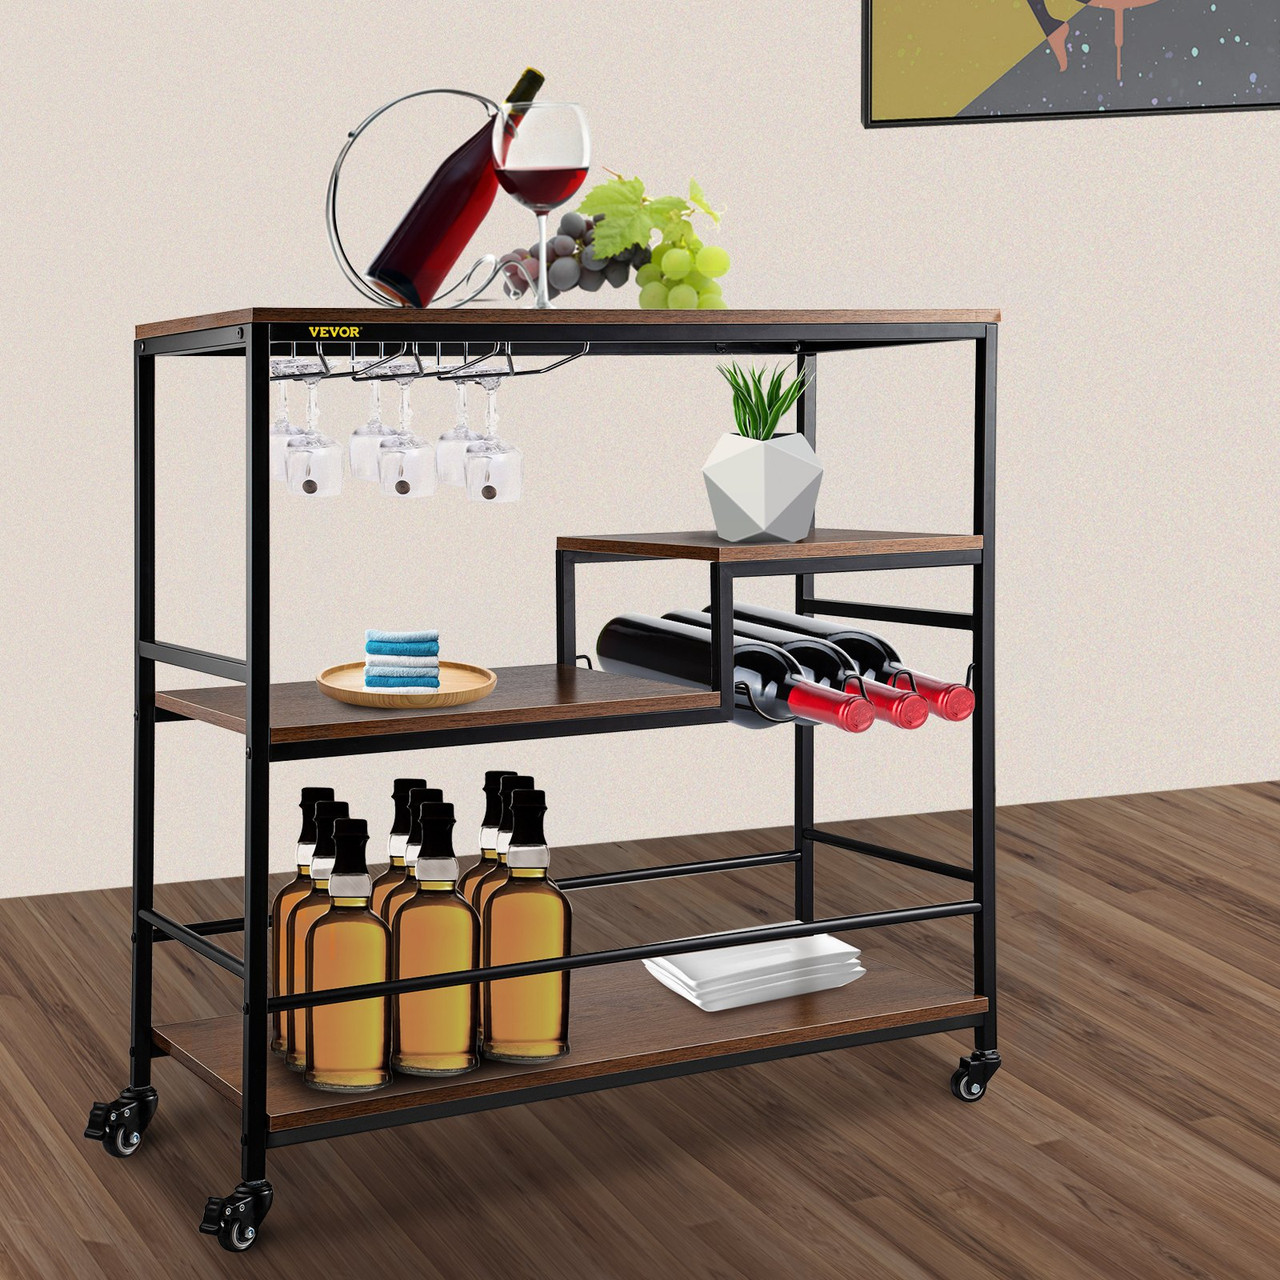 Bar Serving Cart, 4-Tier Industrial Bar Cart for Home, Bar Cart with Wine Rack & Glass Holders, 35.4 x 15.7 x 37.4 inches Home Bar & Serving Carts,